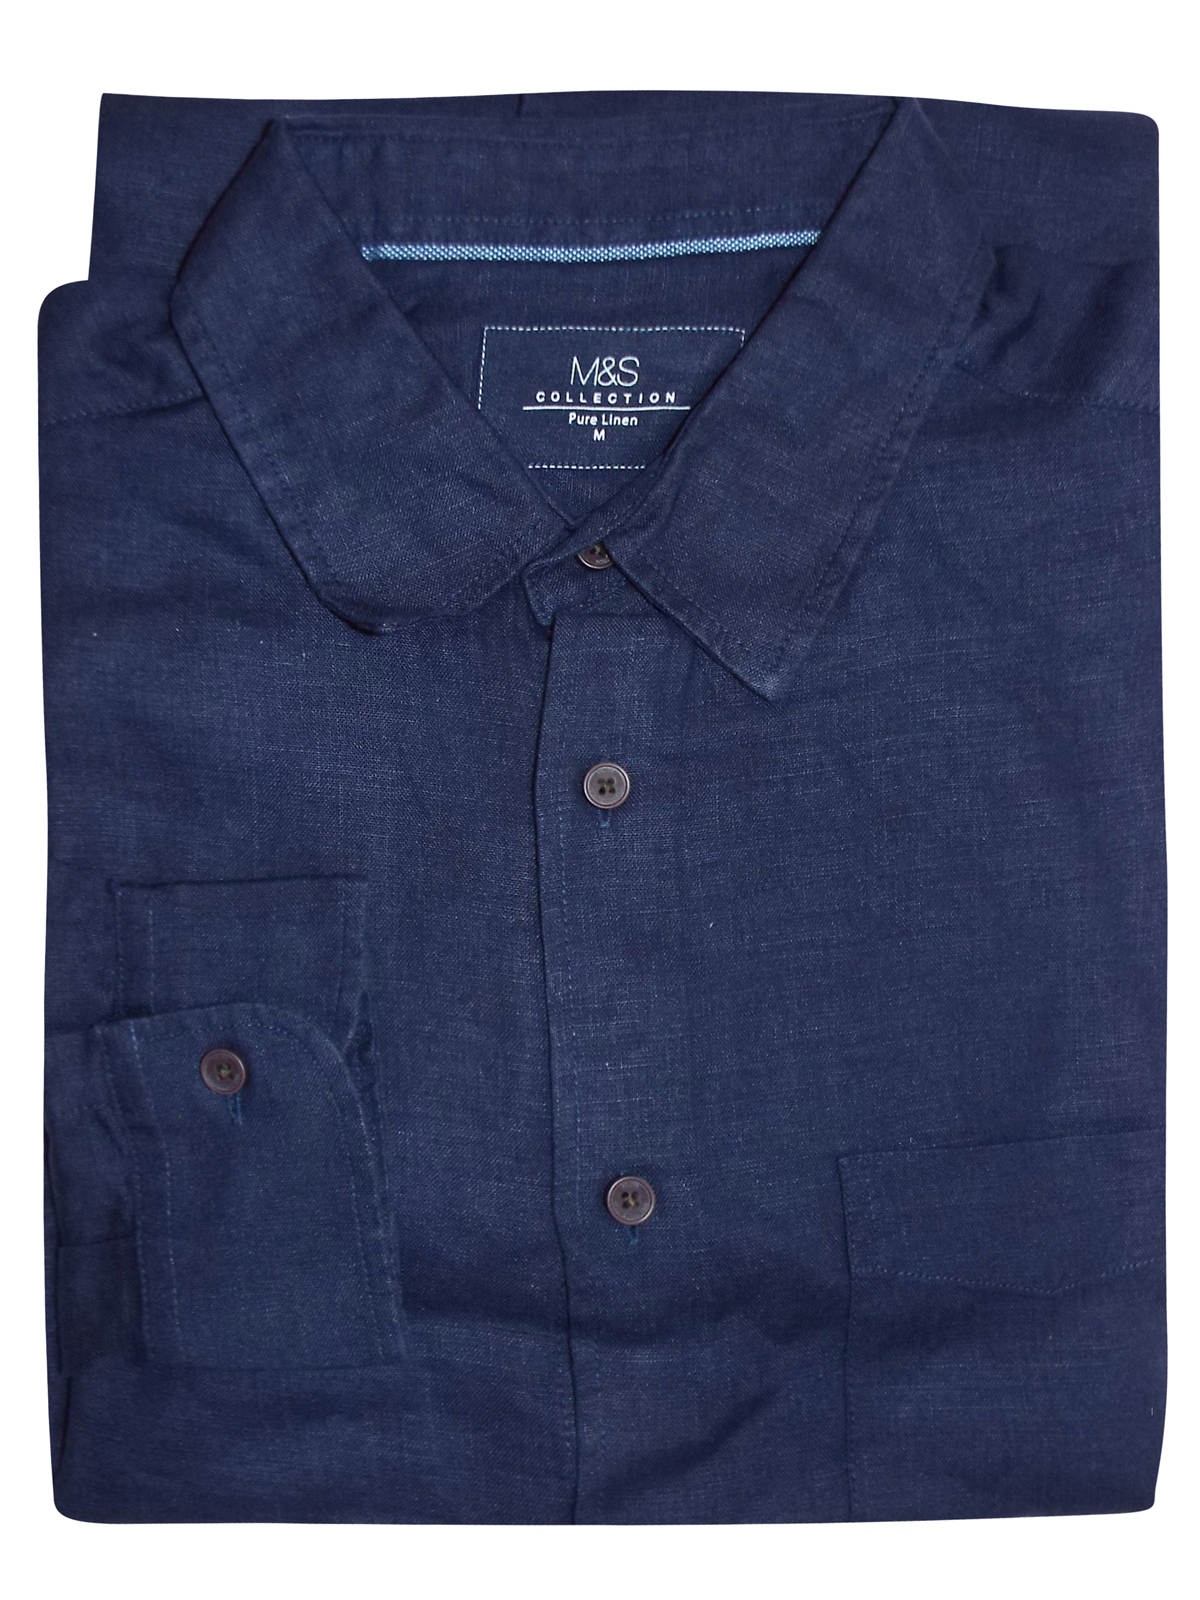 Marks and Spencer - - M&5 NAVY Mens Pure Linen Shirt with Pocket - Size ...